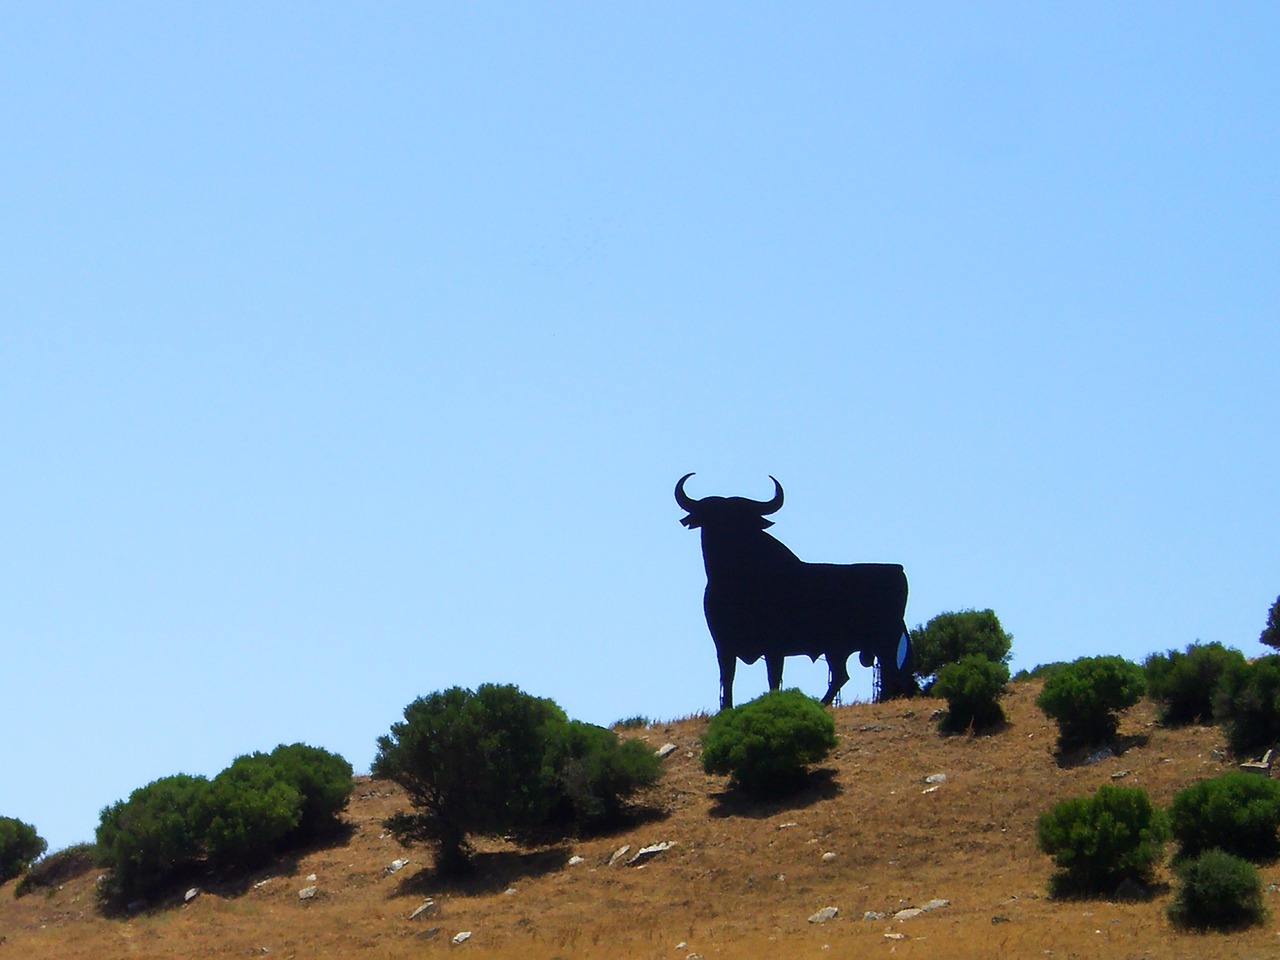 Spain,bull,andalusia,osborne,free pictures - free image from needpix.com